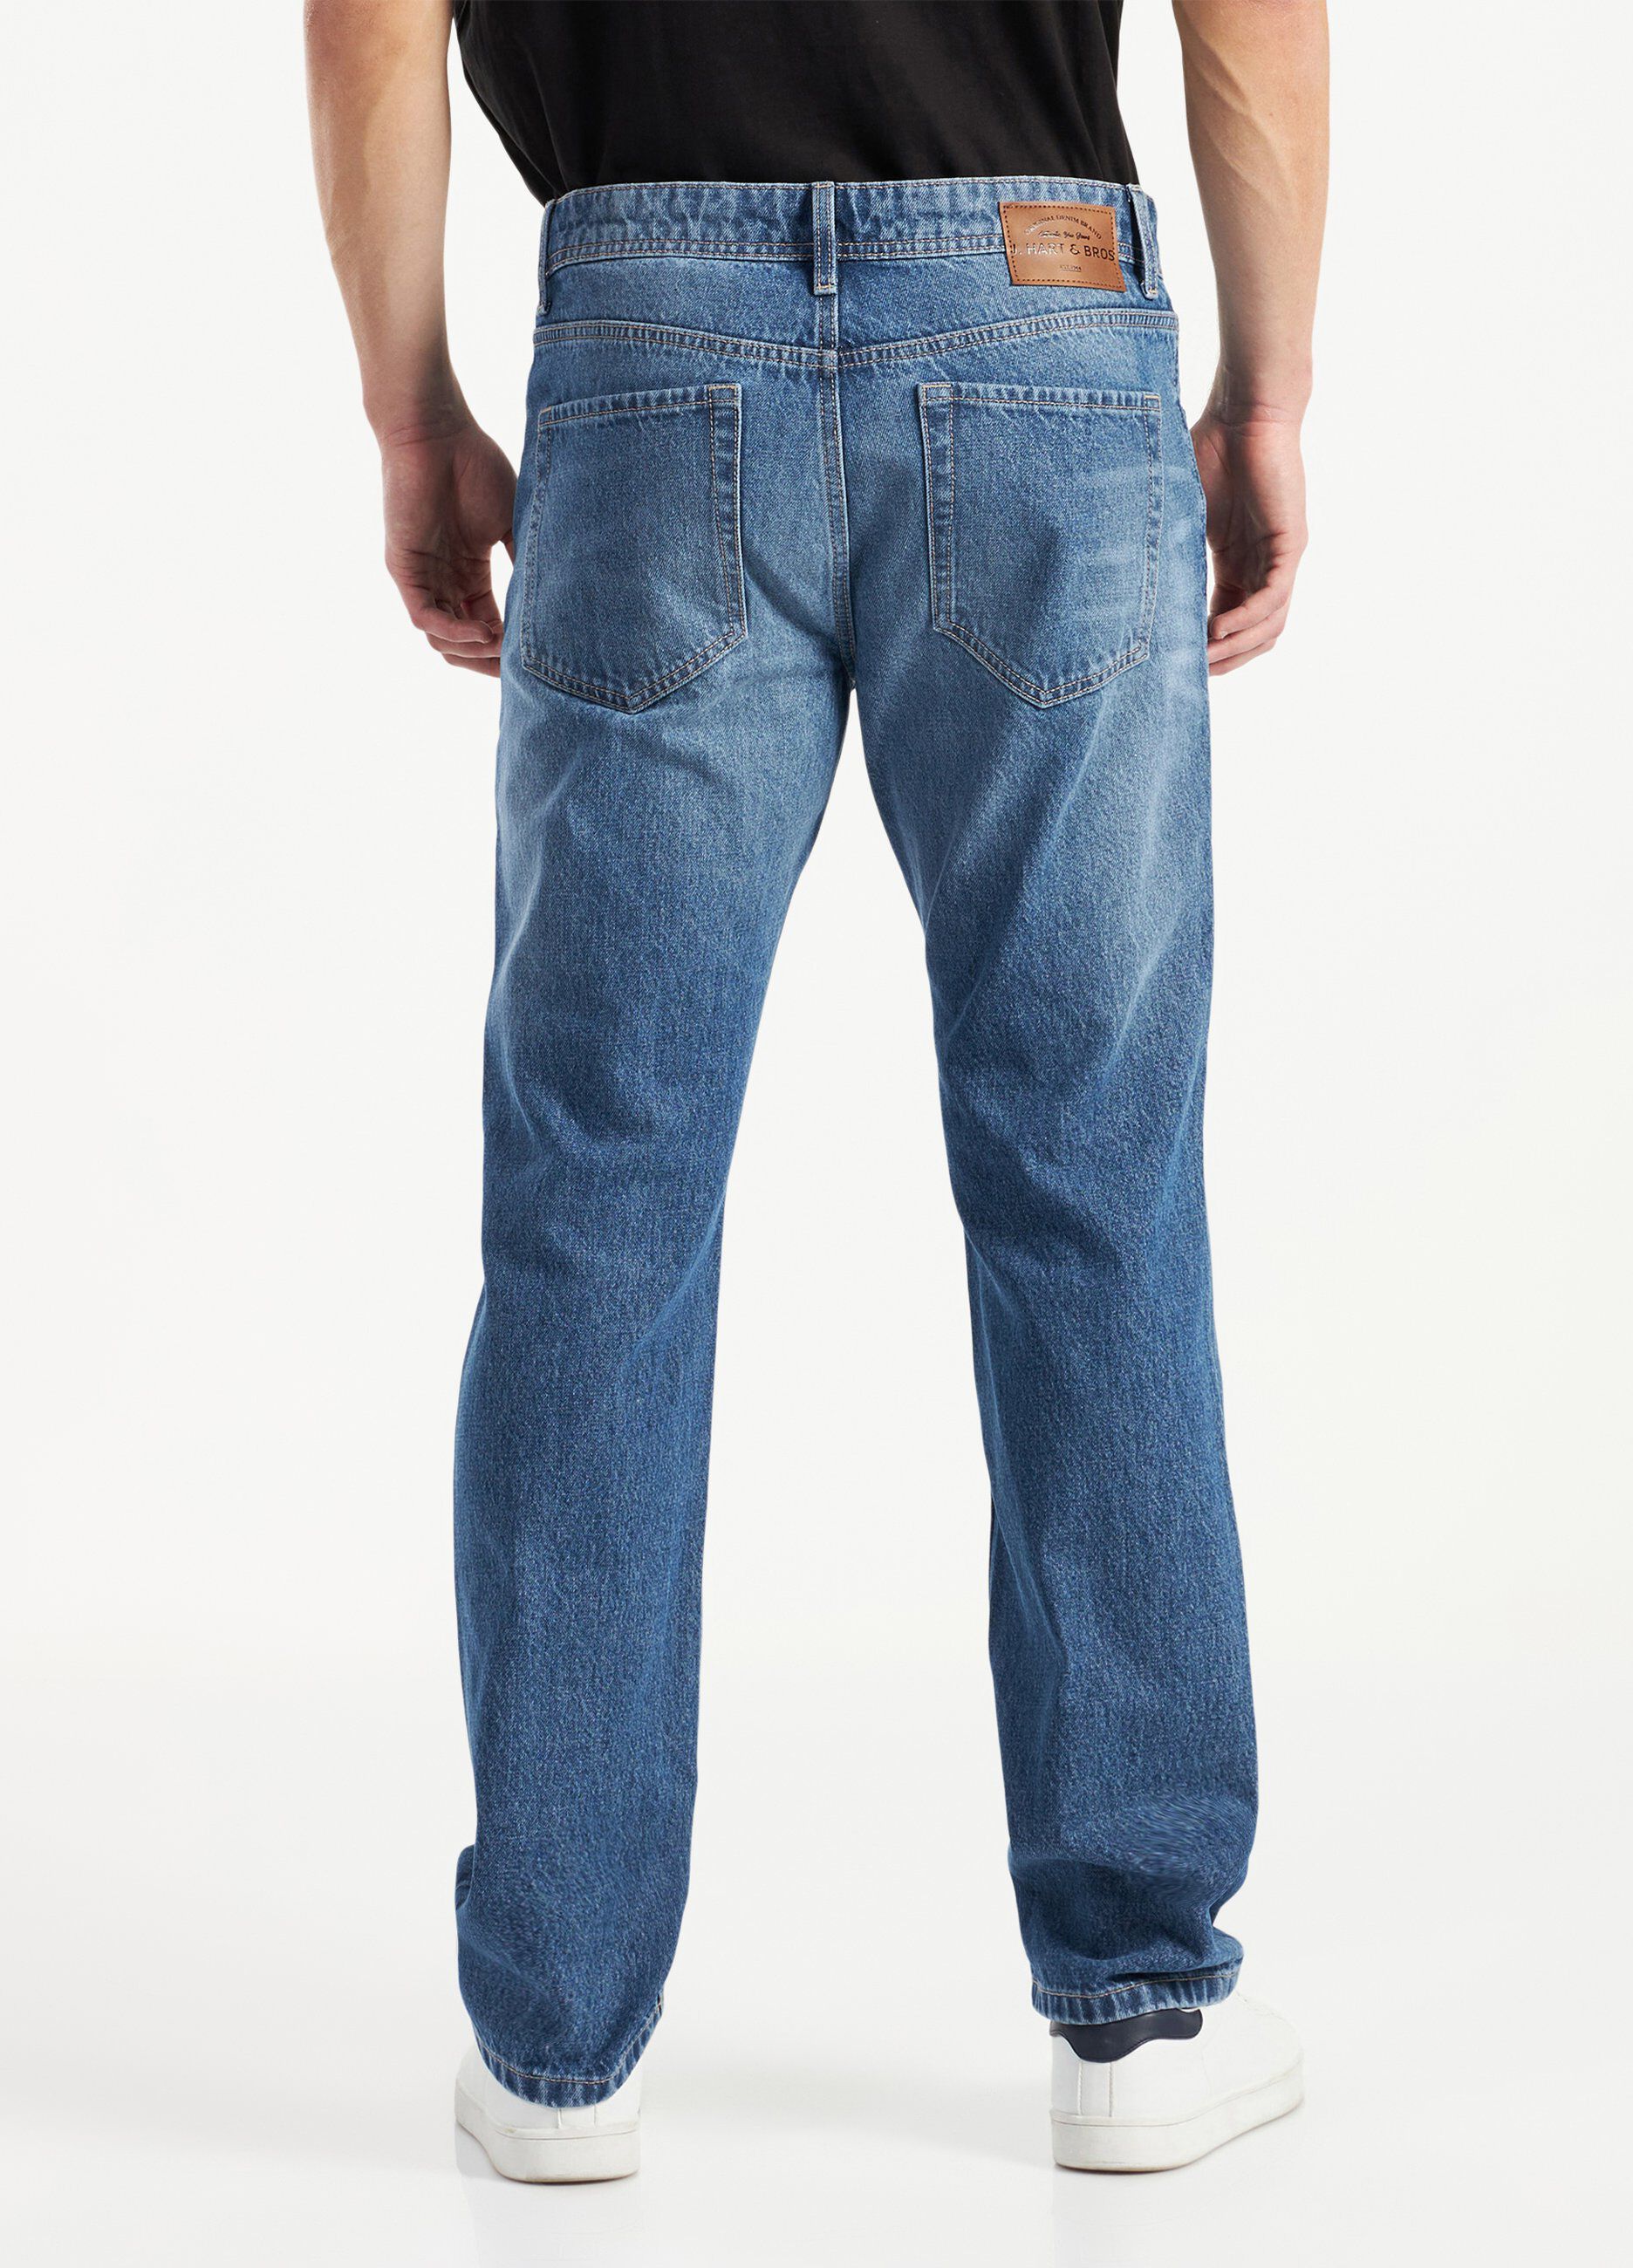 Jeans regular fit stone washed uomo